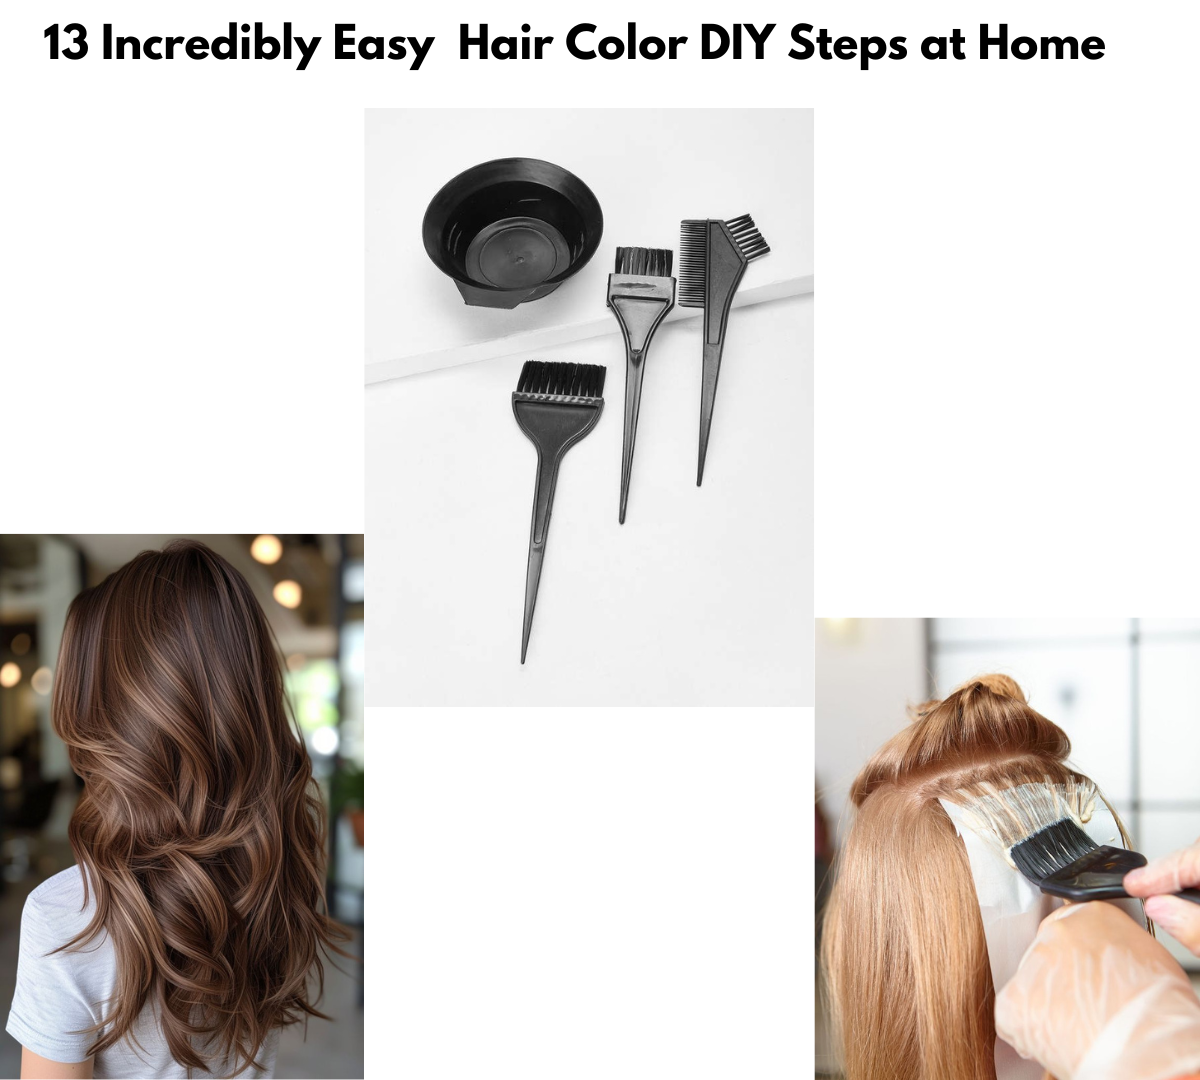 Easy Hair Color DIY Steps at Home